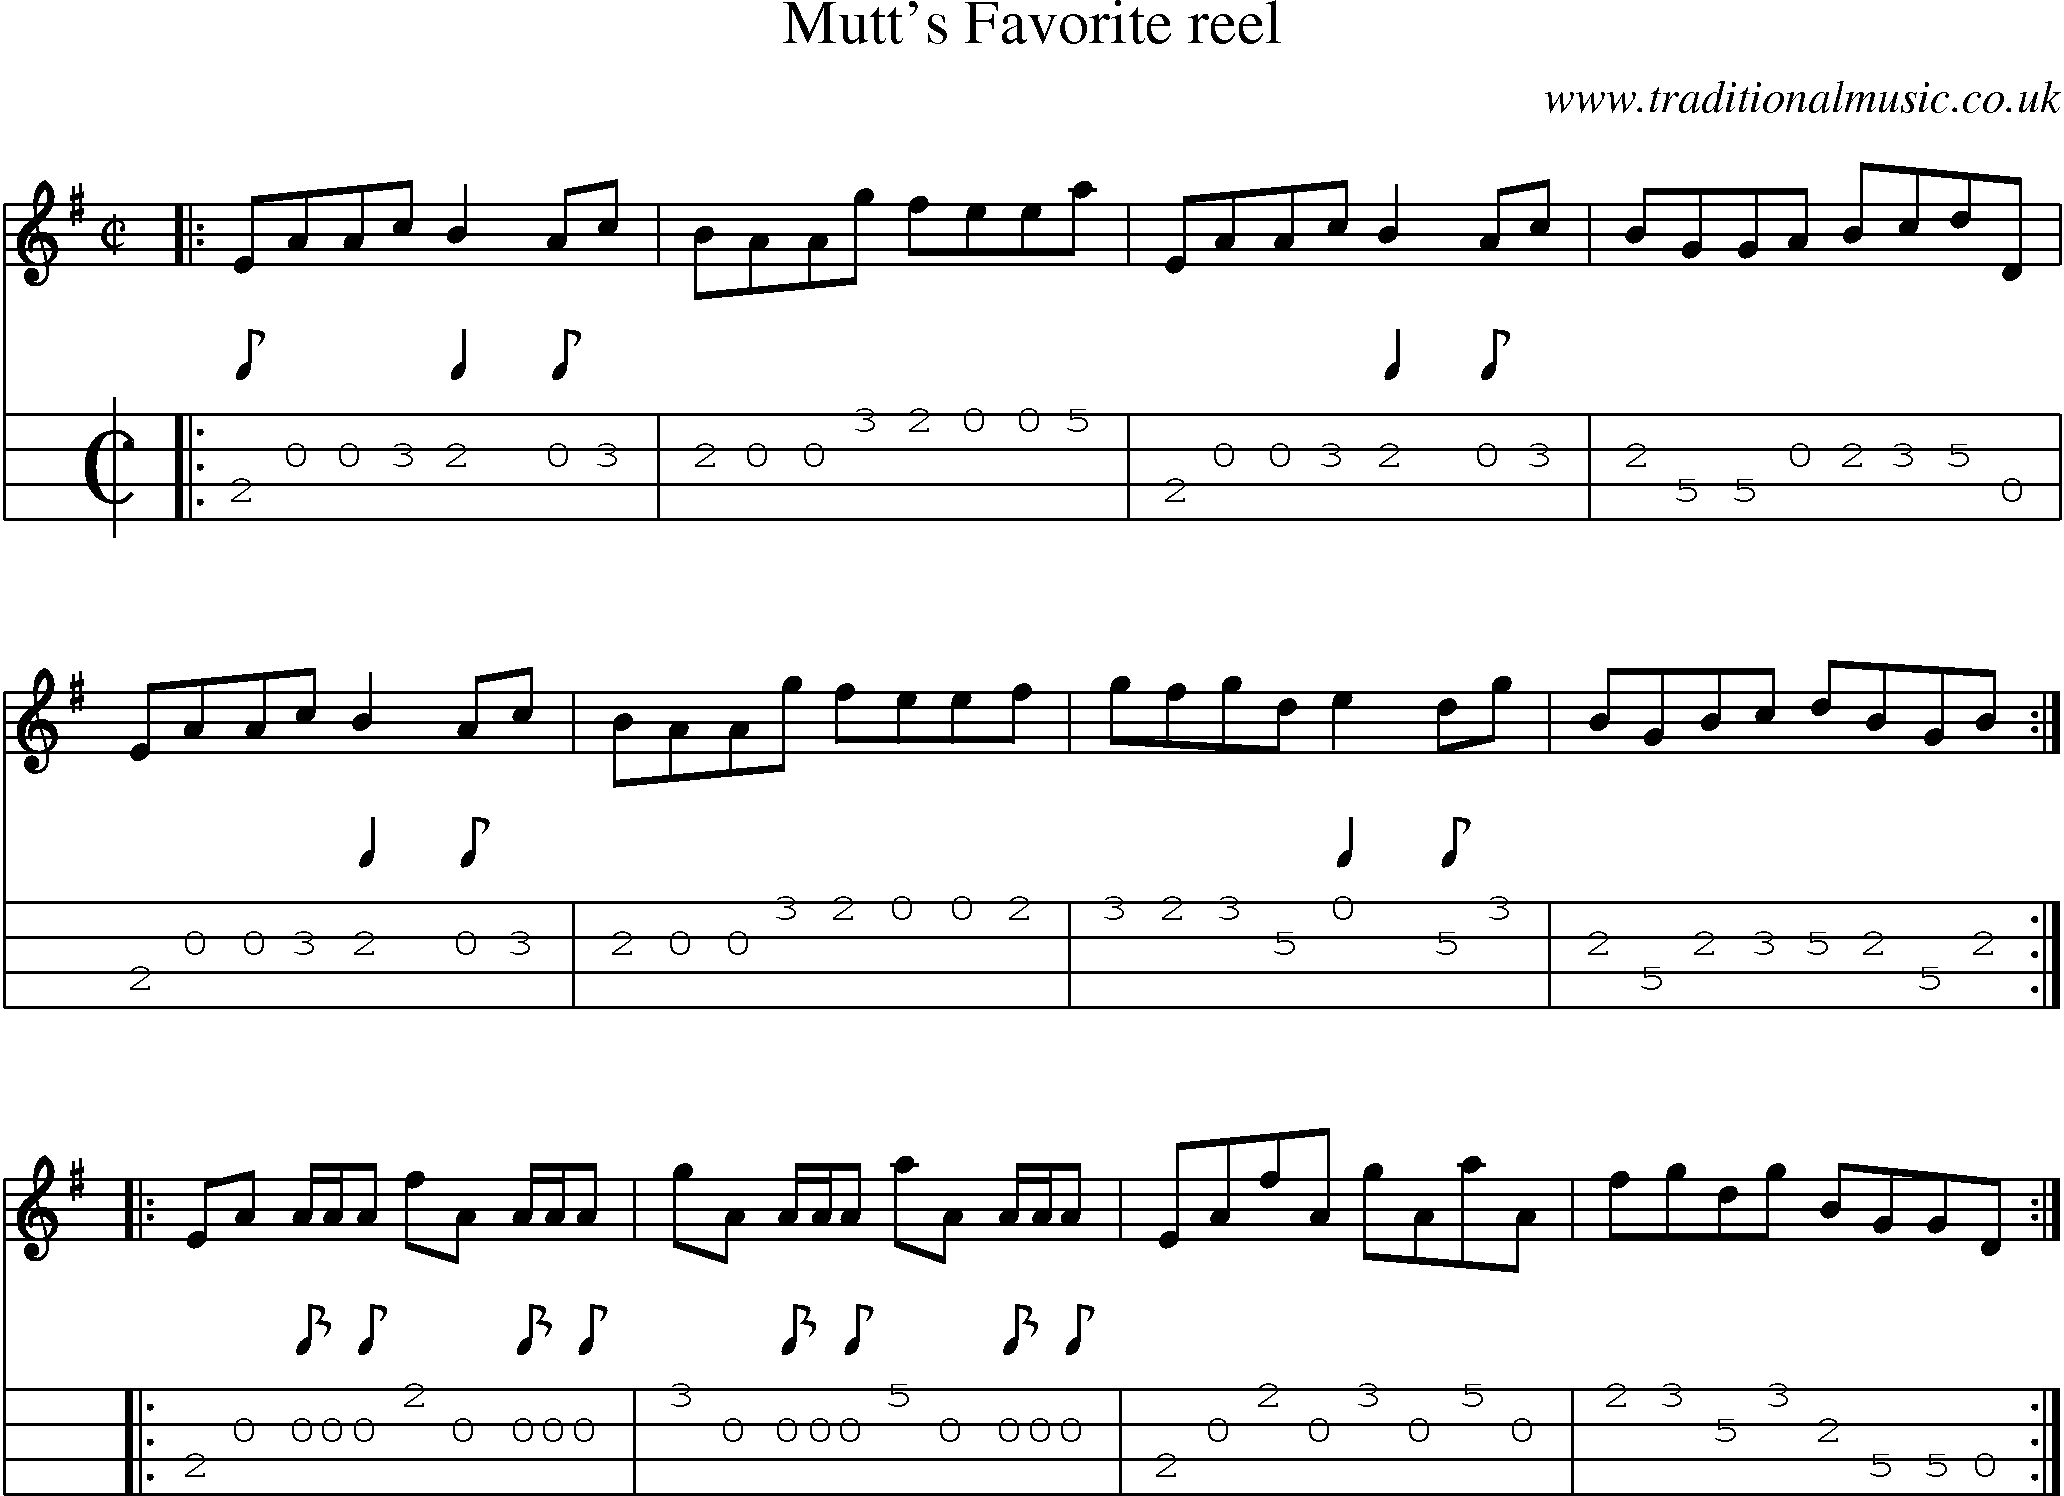 Music Score and Mandolin Tabs for Mutts Favorite Reel